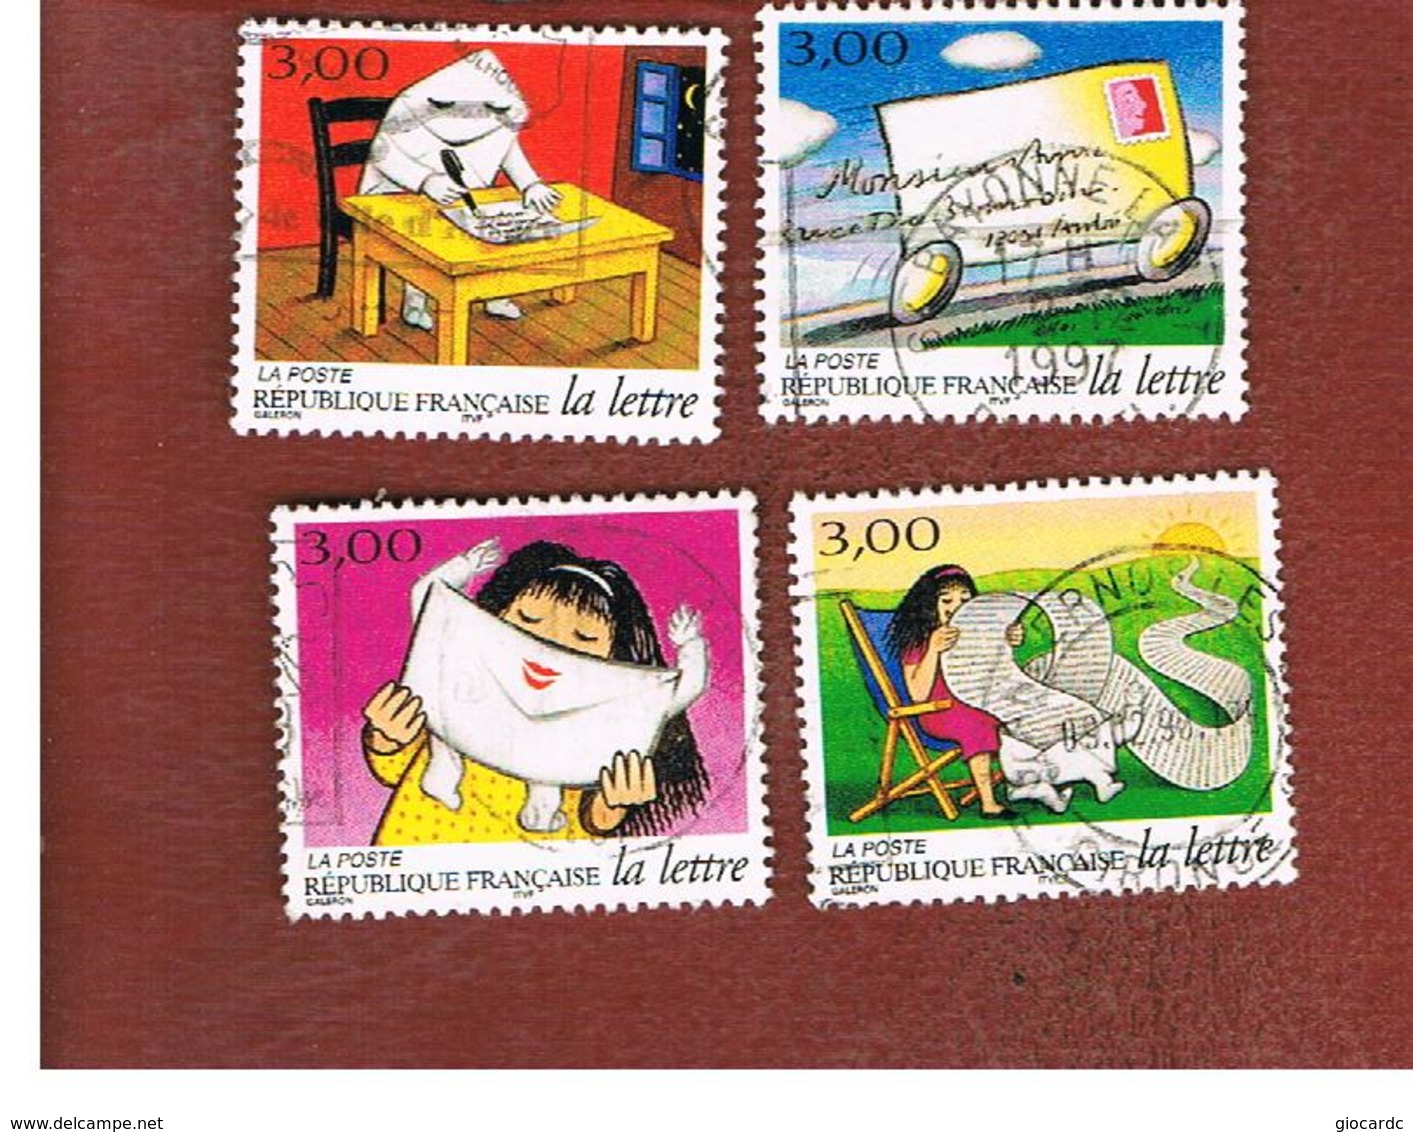 FRANCIA (FRANCE) - SG 3386.3391  - 1997   THE JOURNEY OF A LETTER        -    USED - Gebraucht